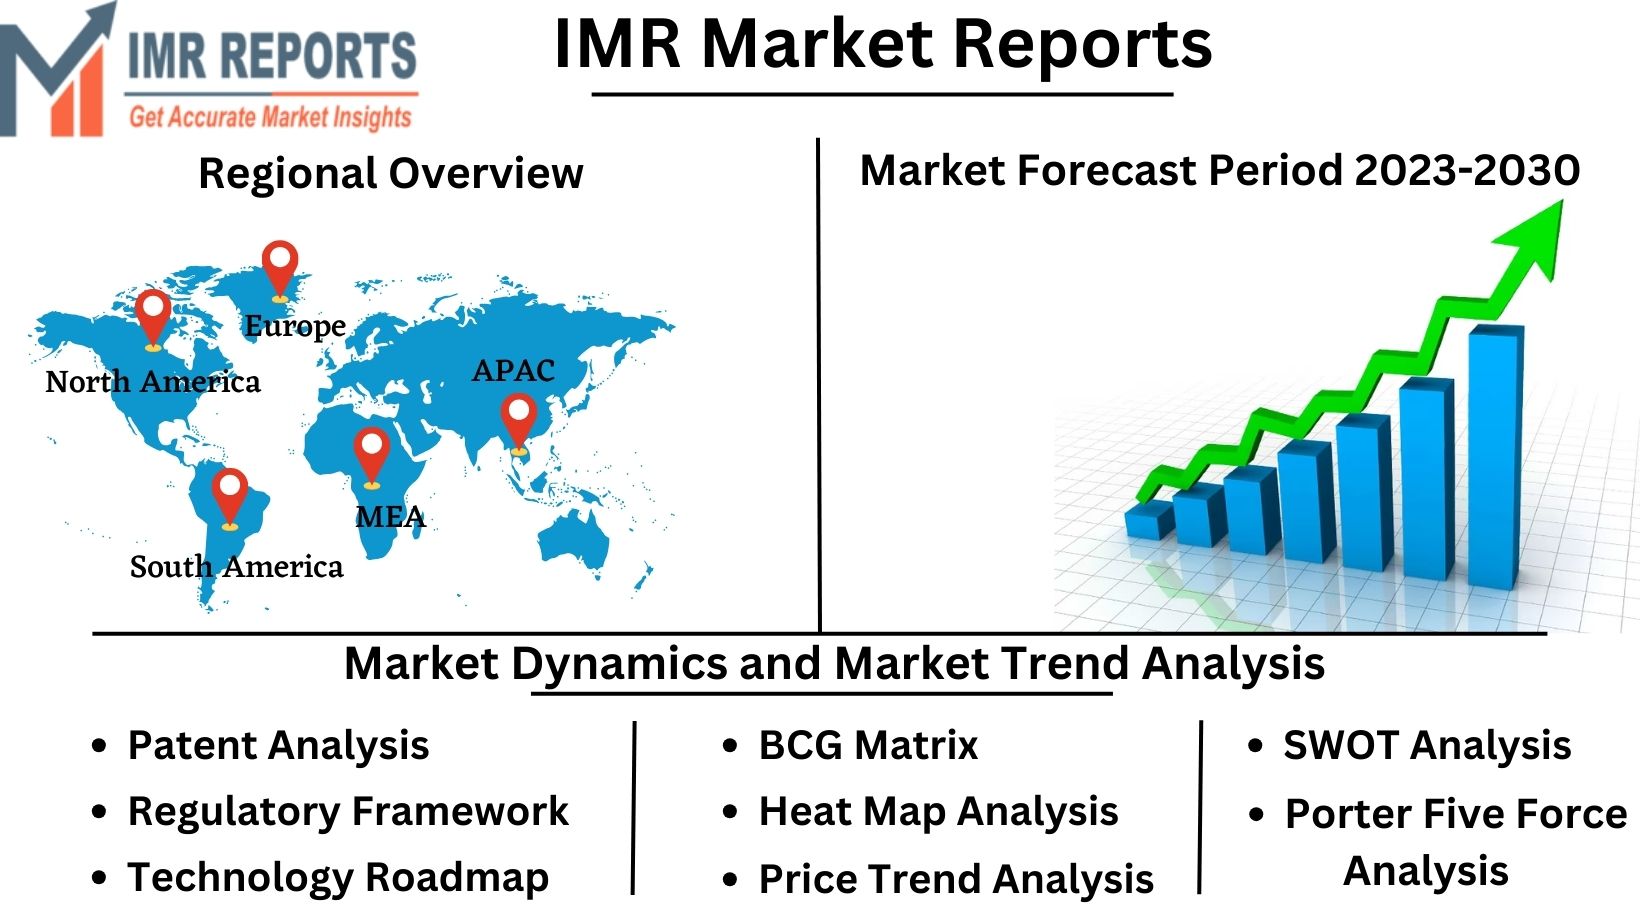 IMR_Market_Reports_(1)89